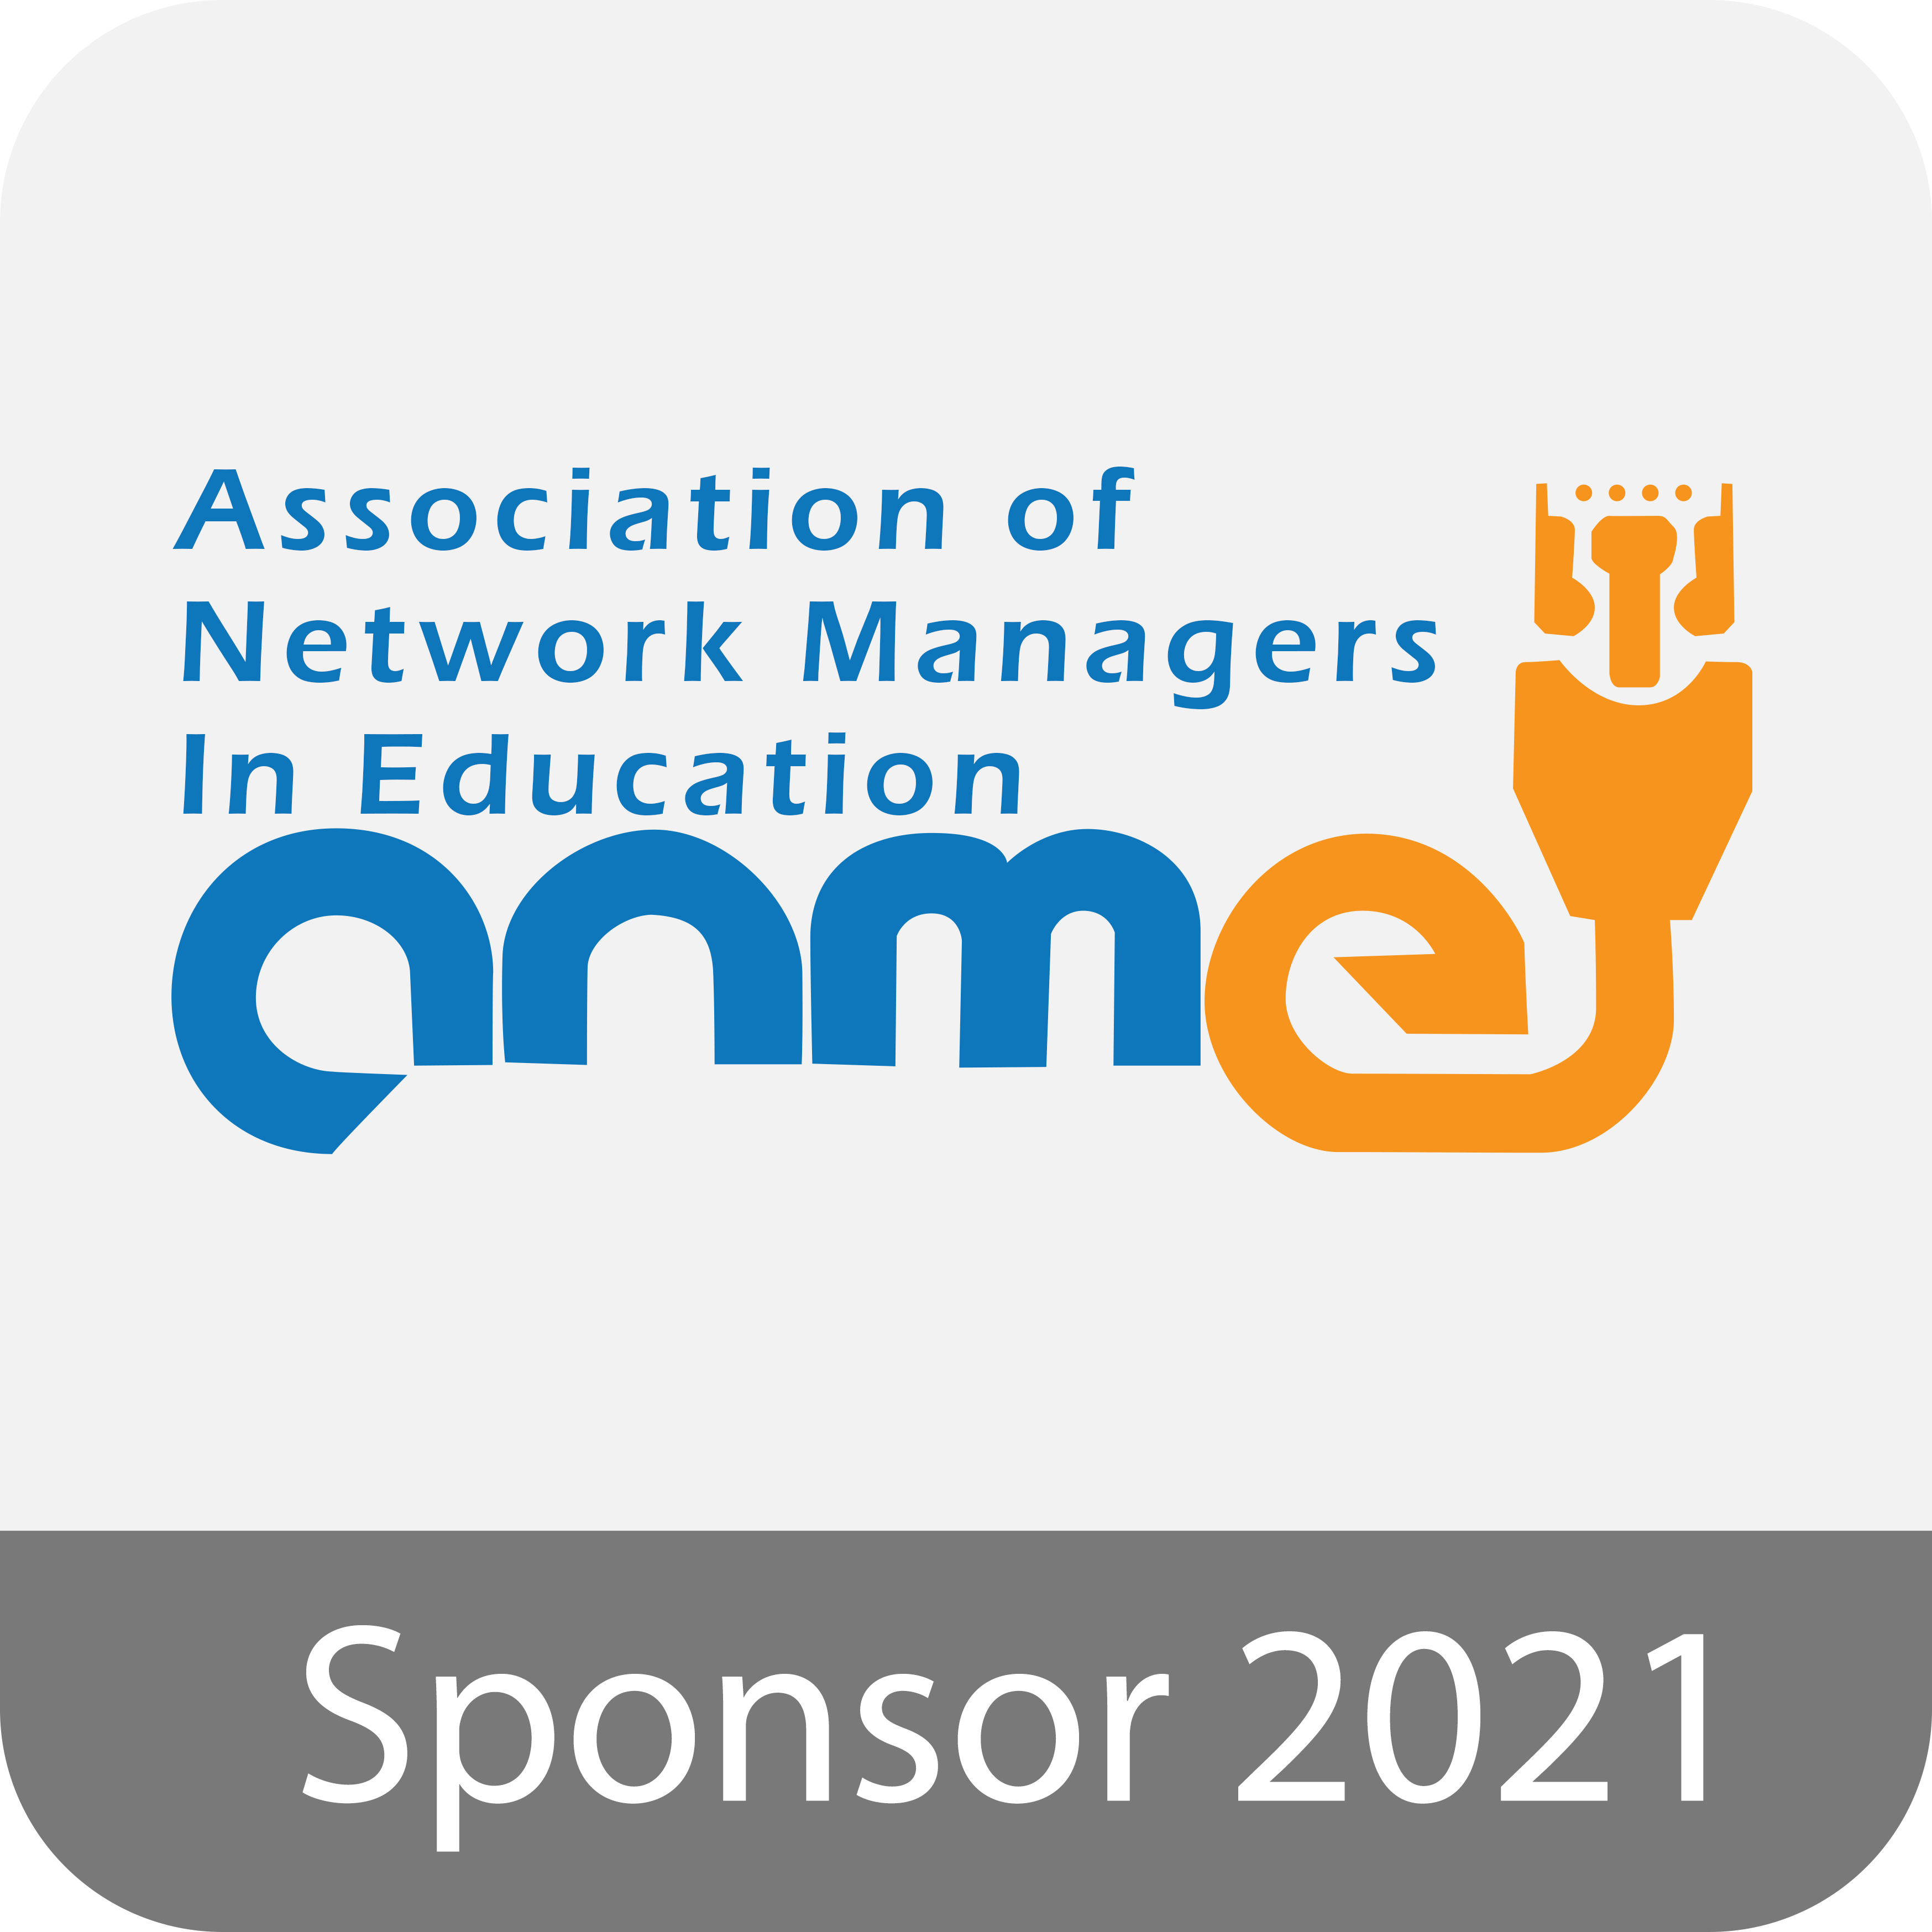 Association of Network Managers in Education Sponsor 2021 logo